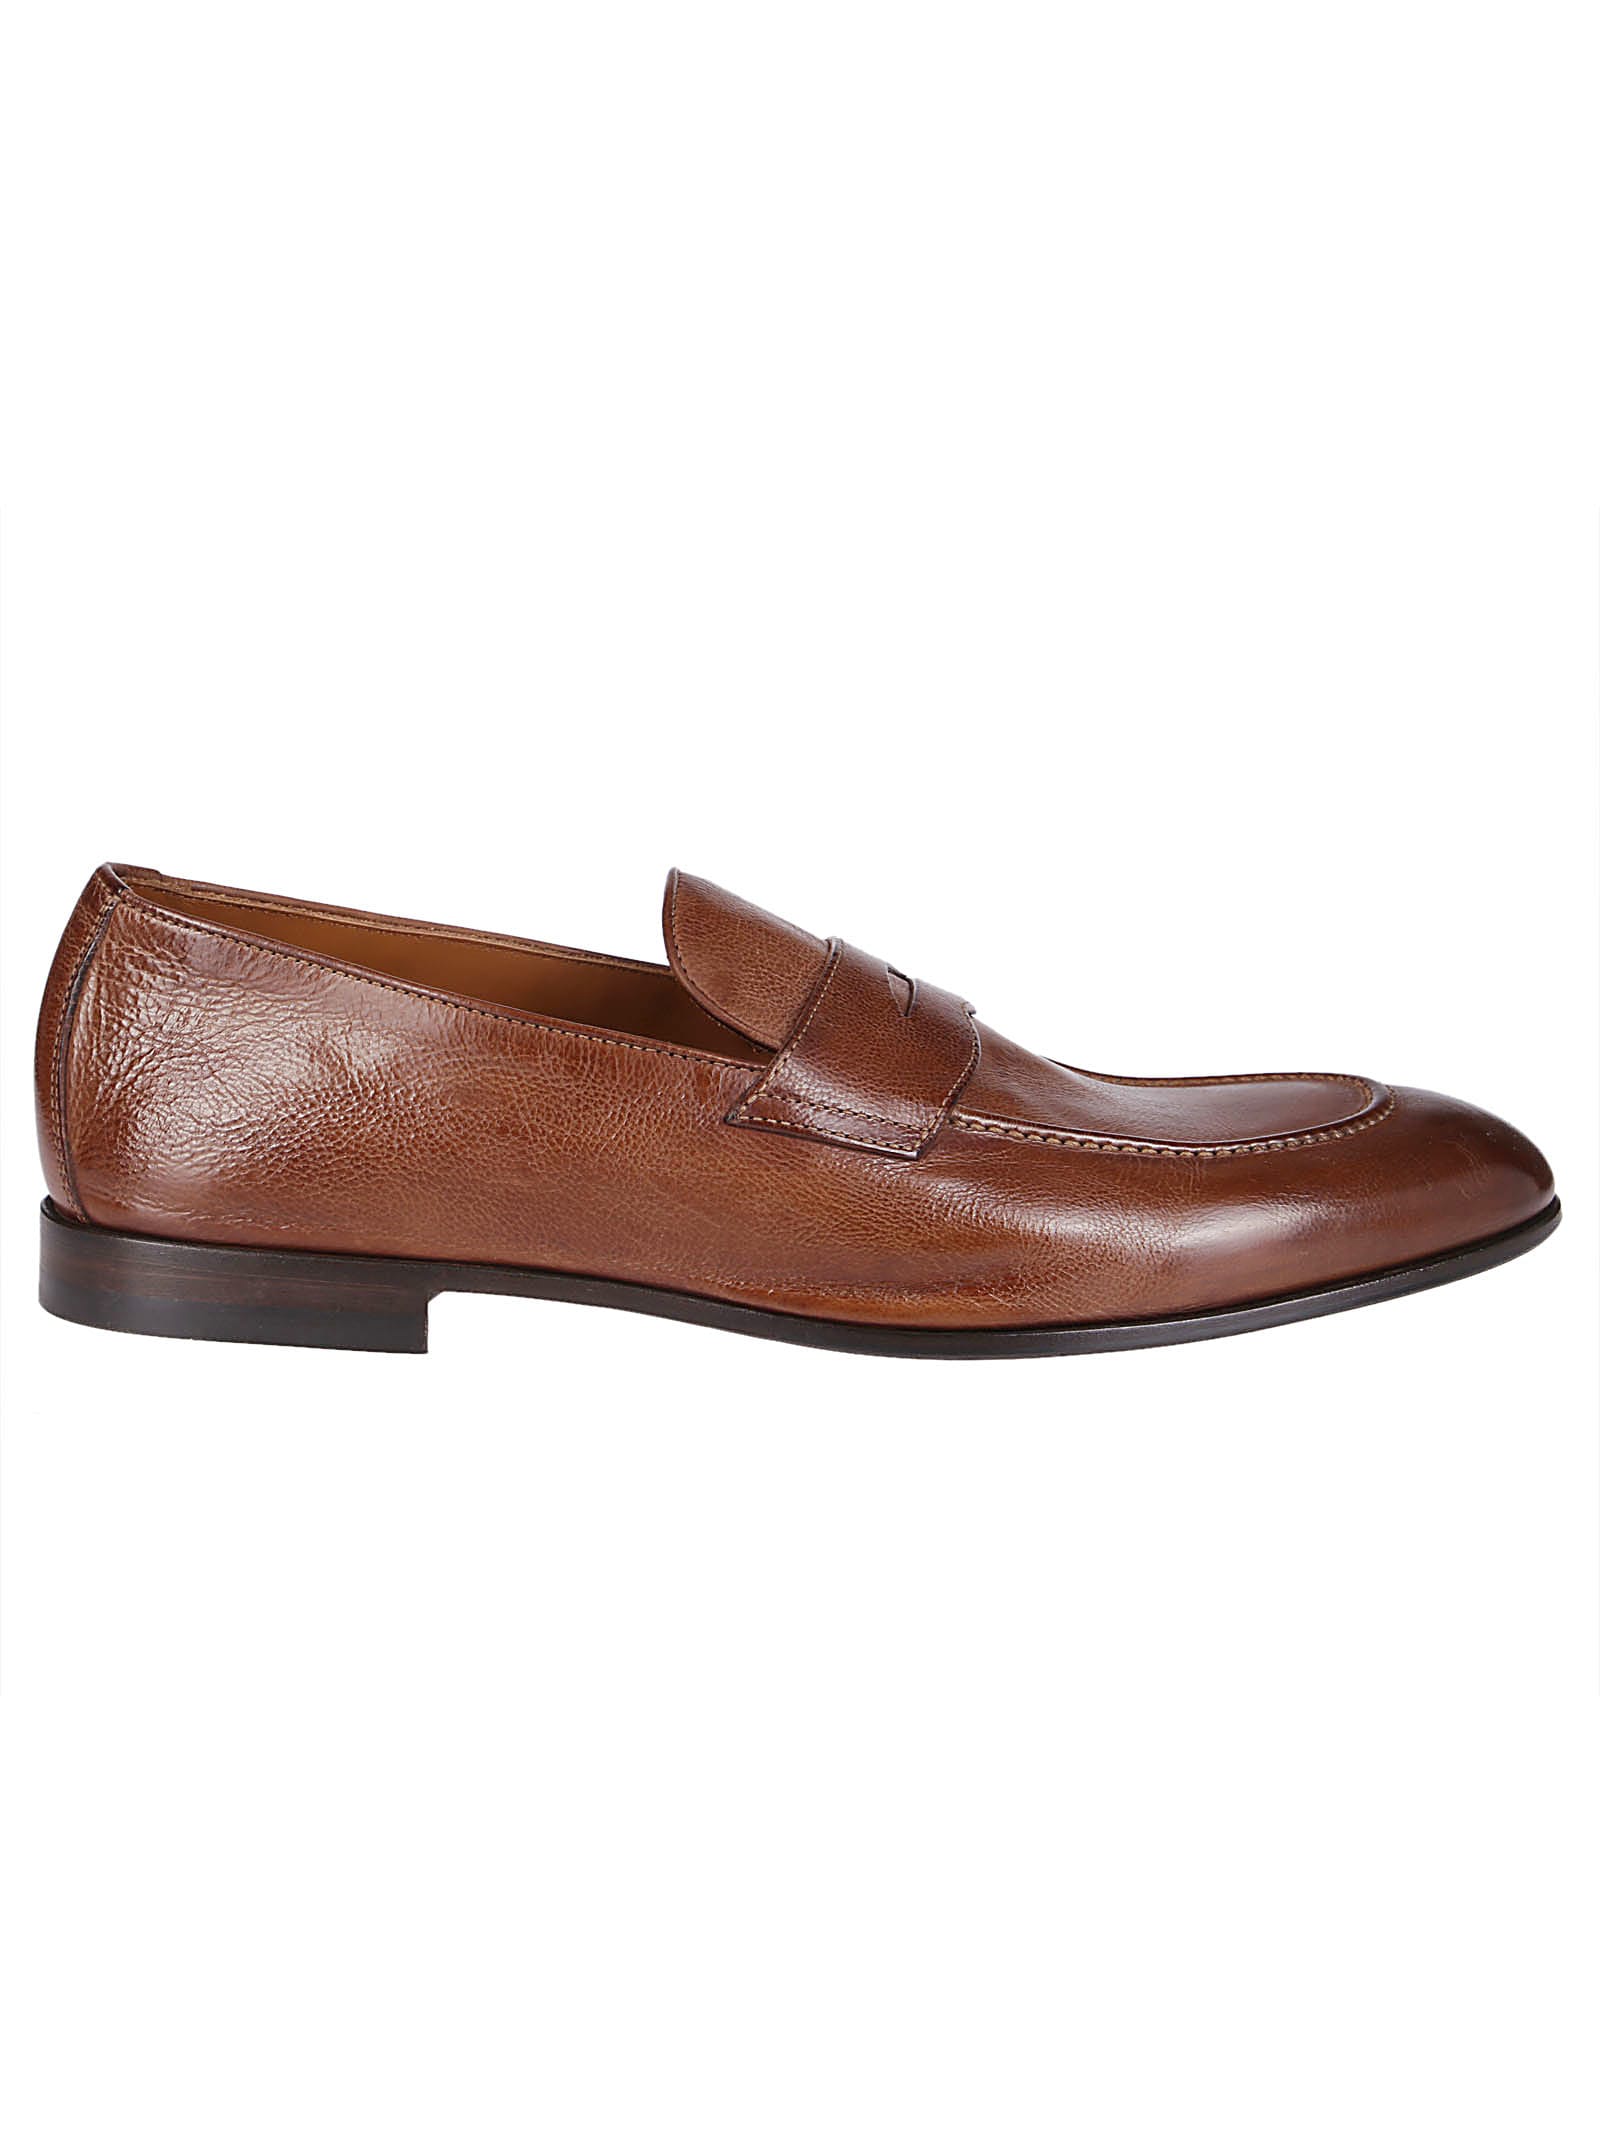 BRUNELLO CUCINELLI BROWN LEATHER LOAFERS,11228245